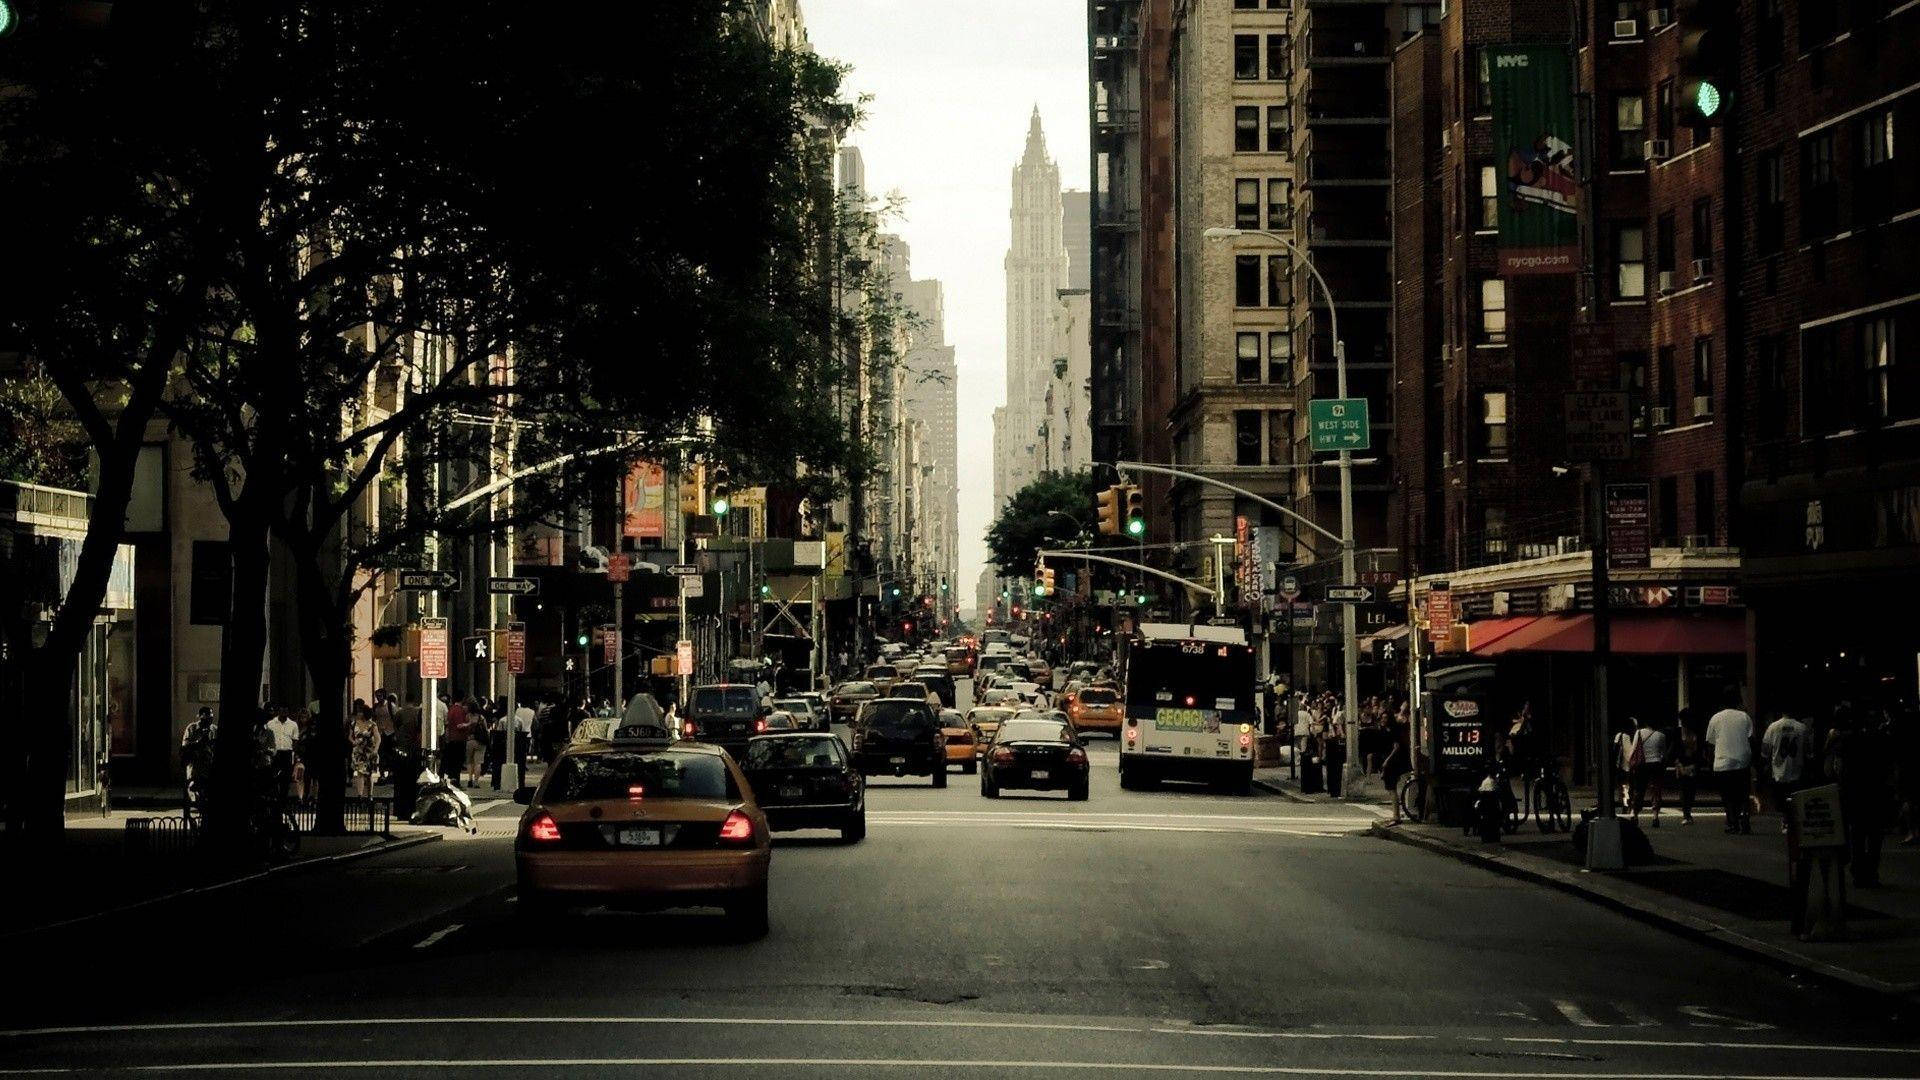 A busy city street with cars and pedestrians. - New York